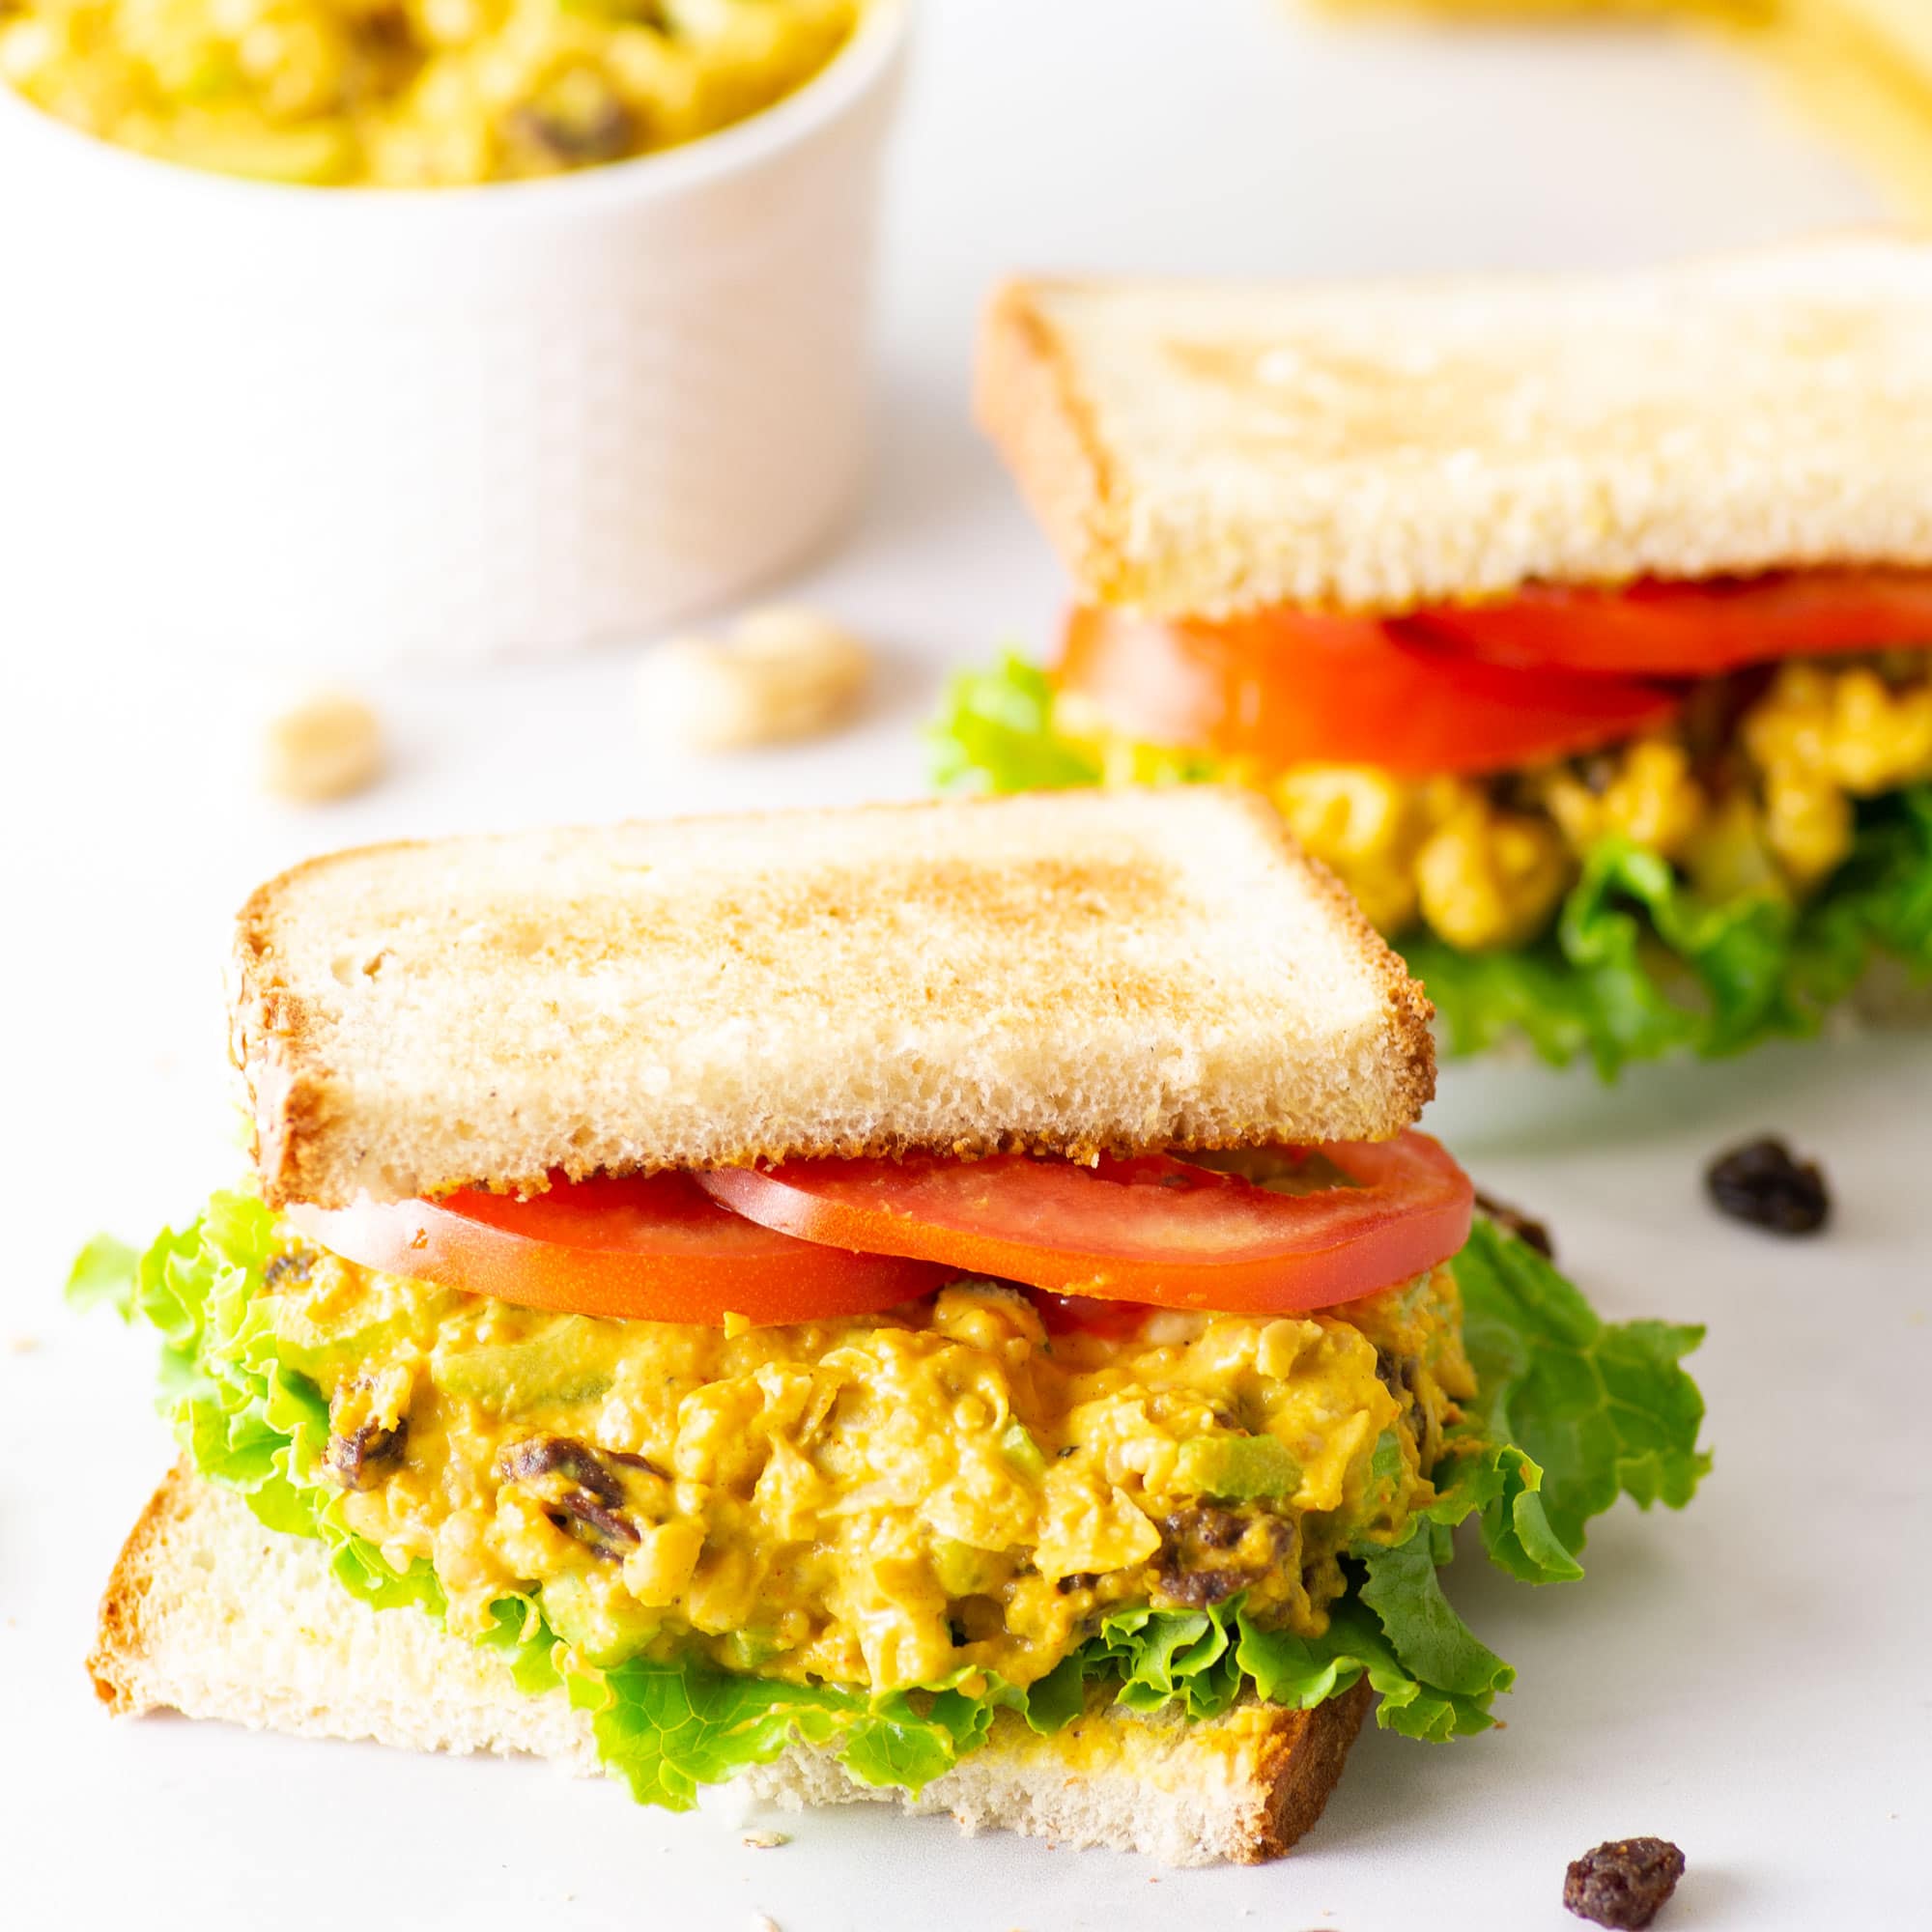 vegan chickpea salad sandwich on marble background with lettuce and tomato